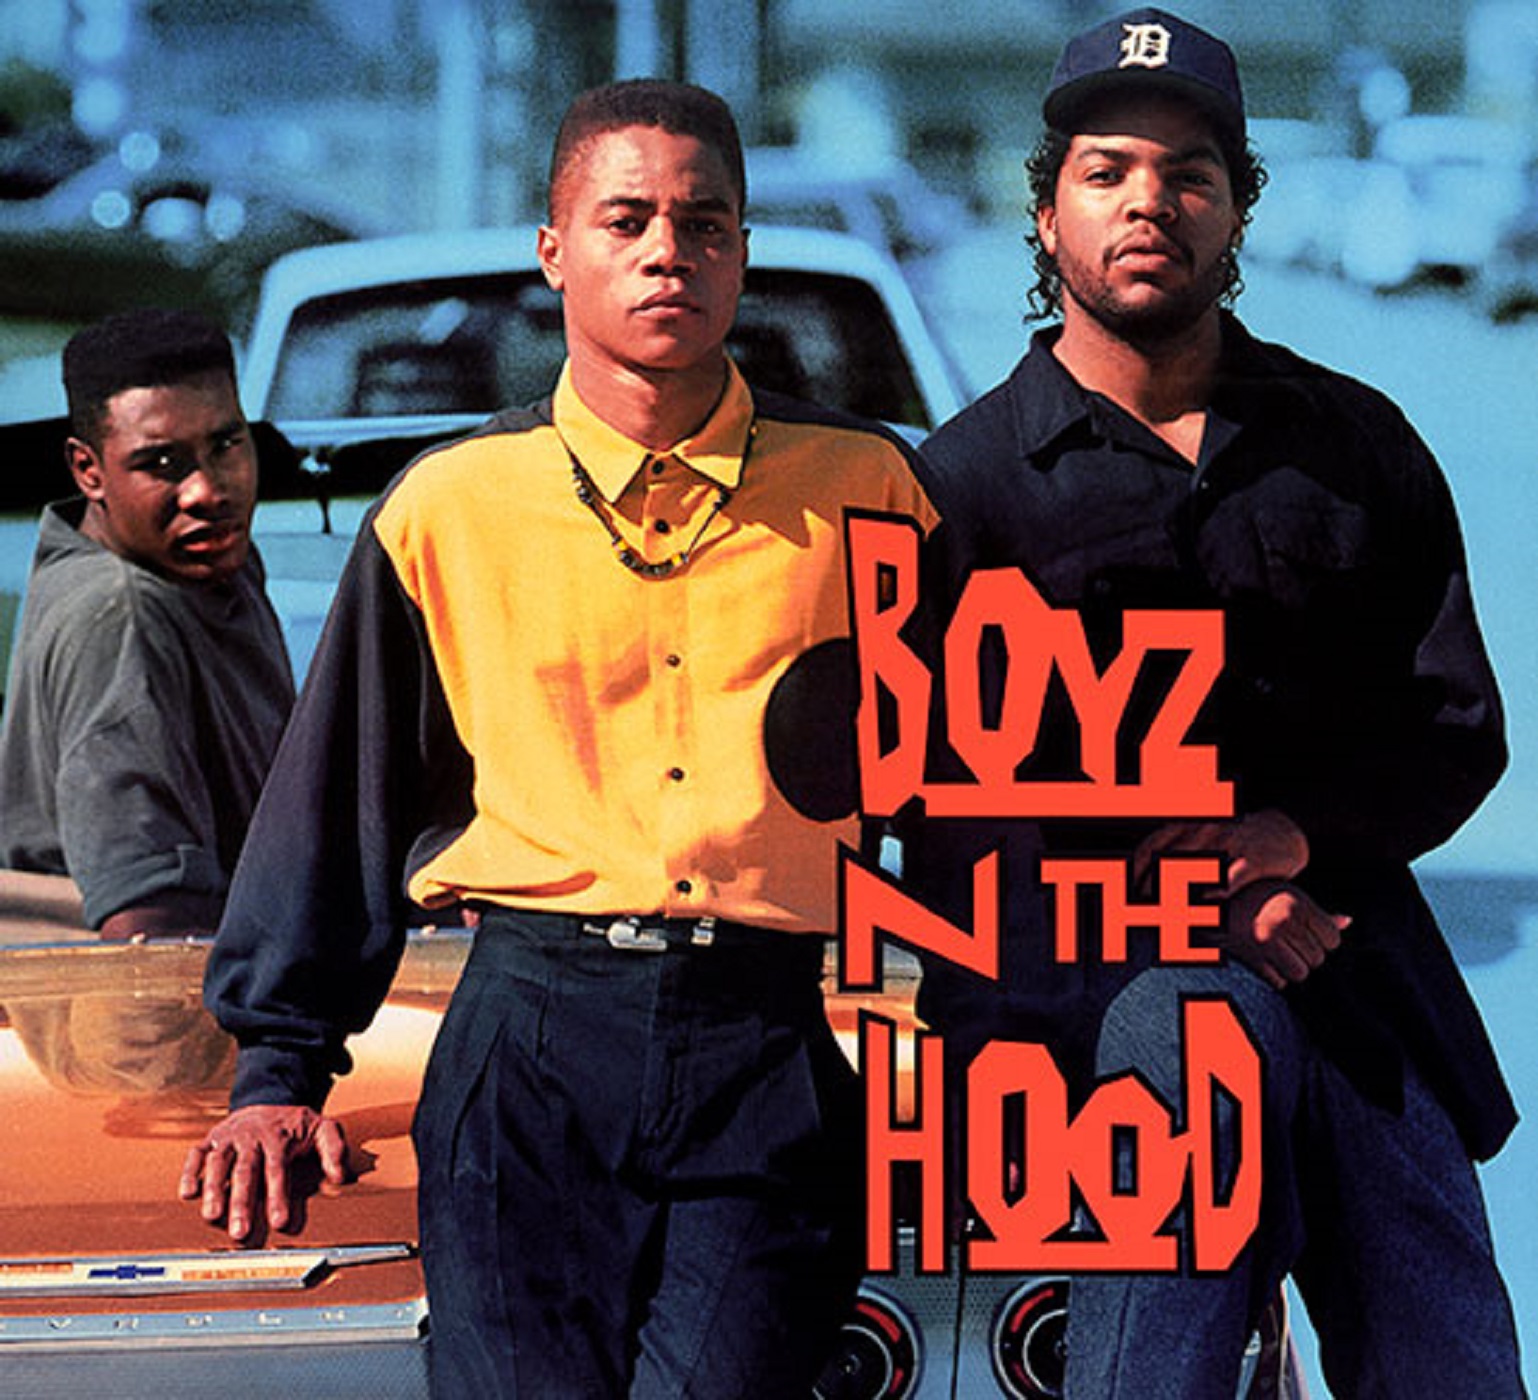 Episode 145: What Is The Last Hood Classic?